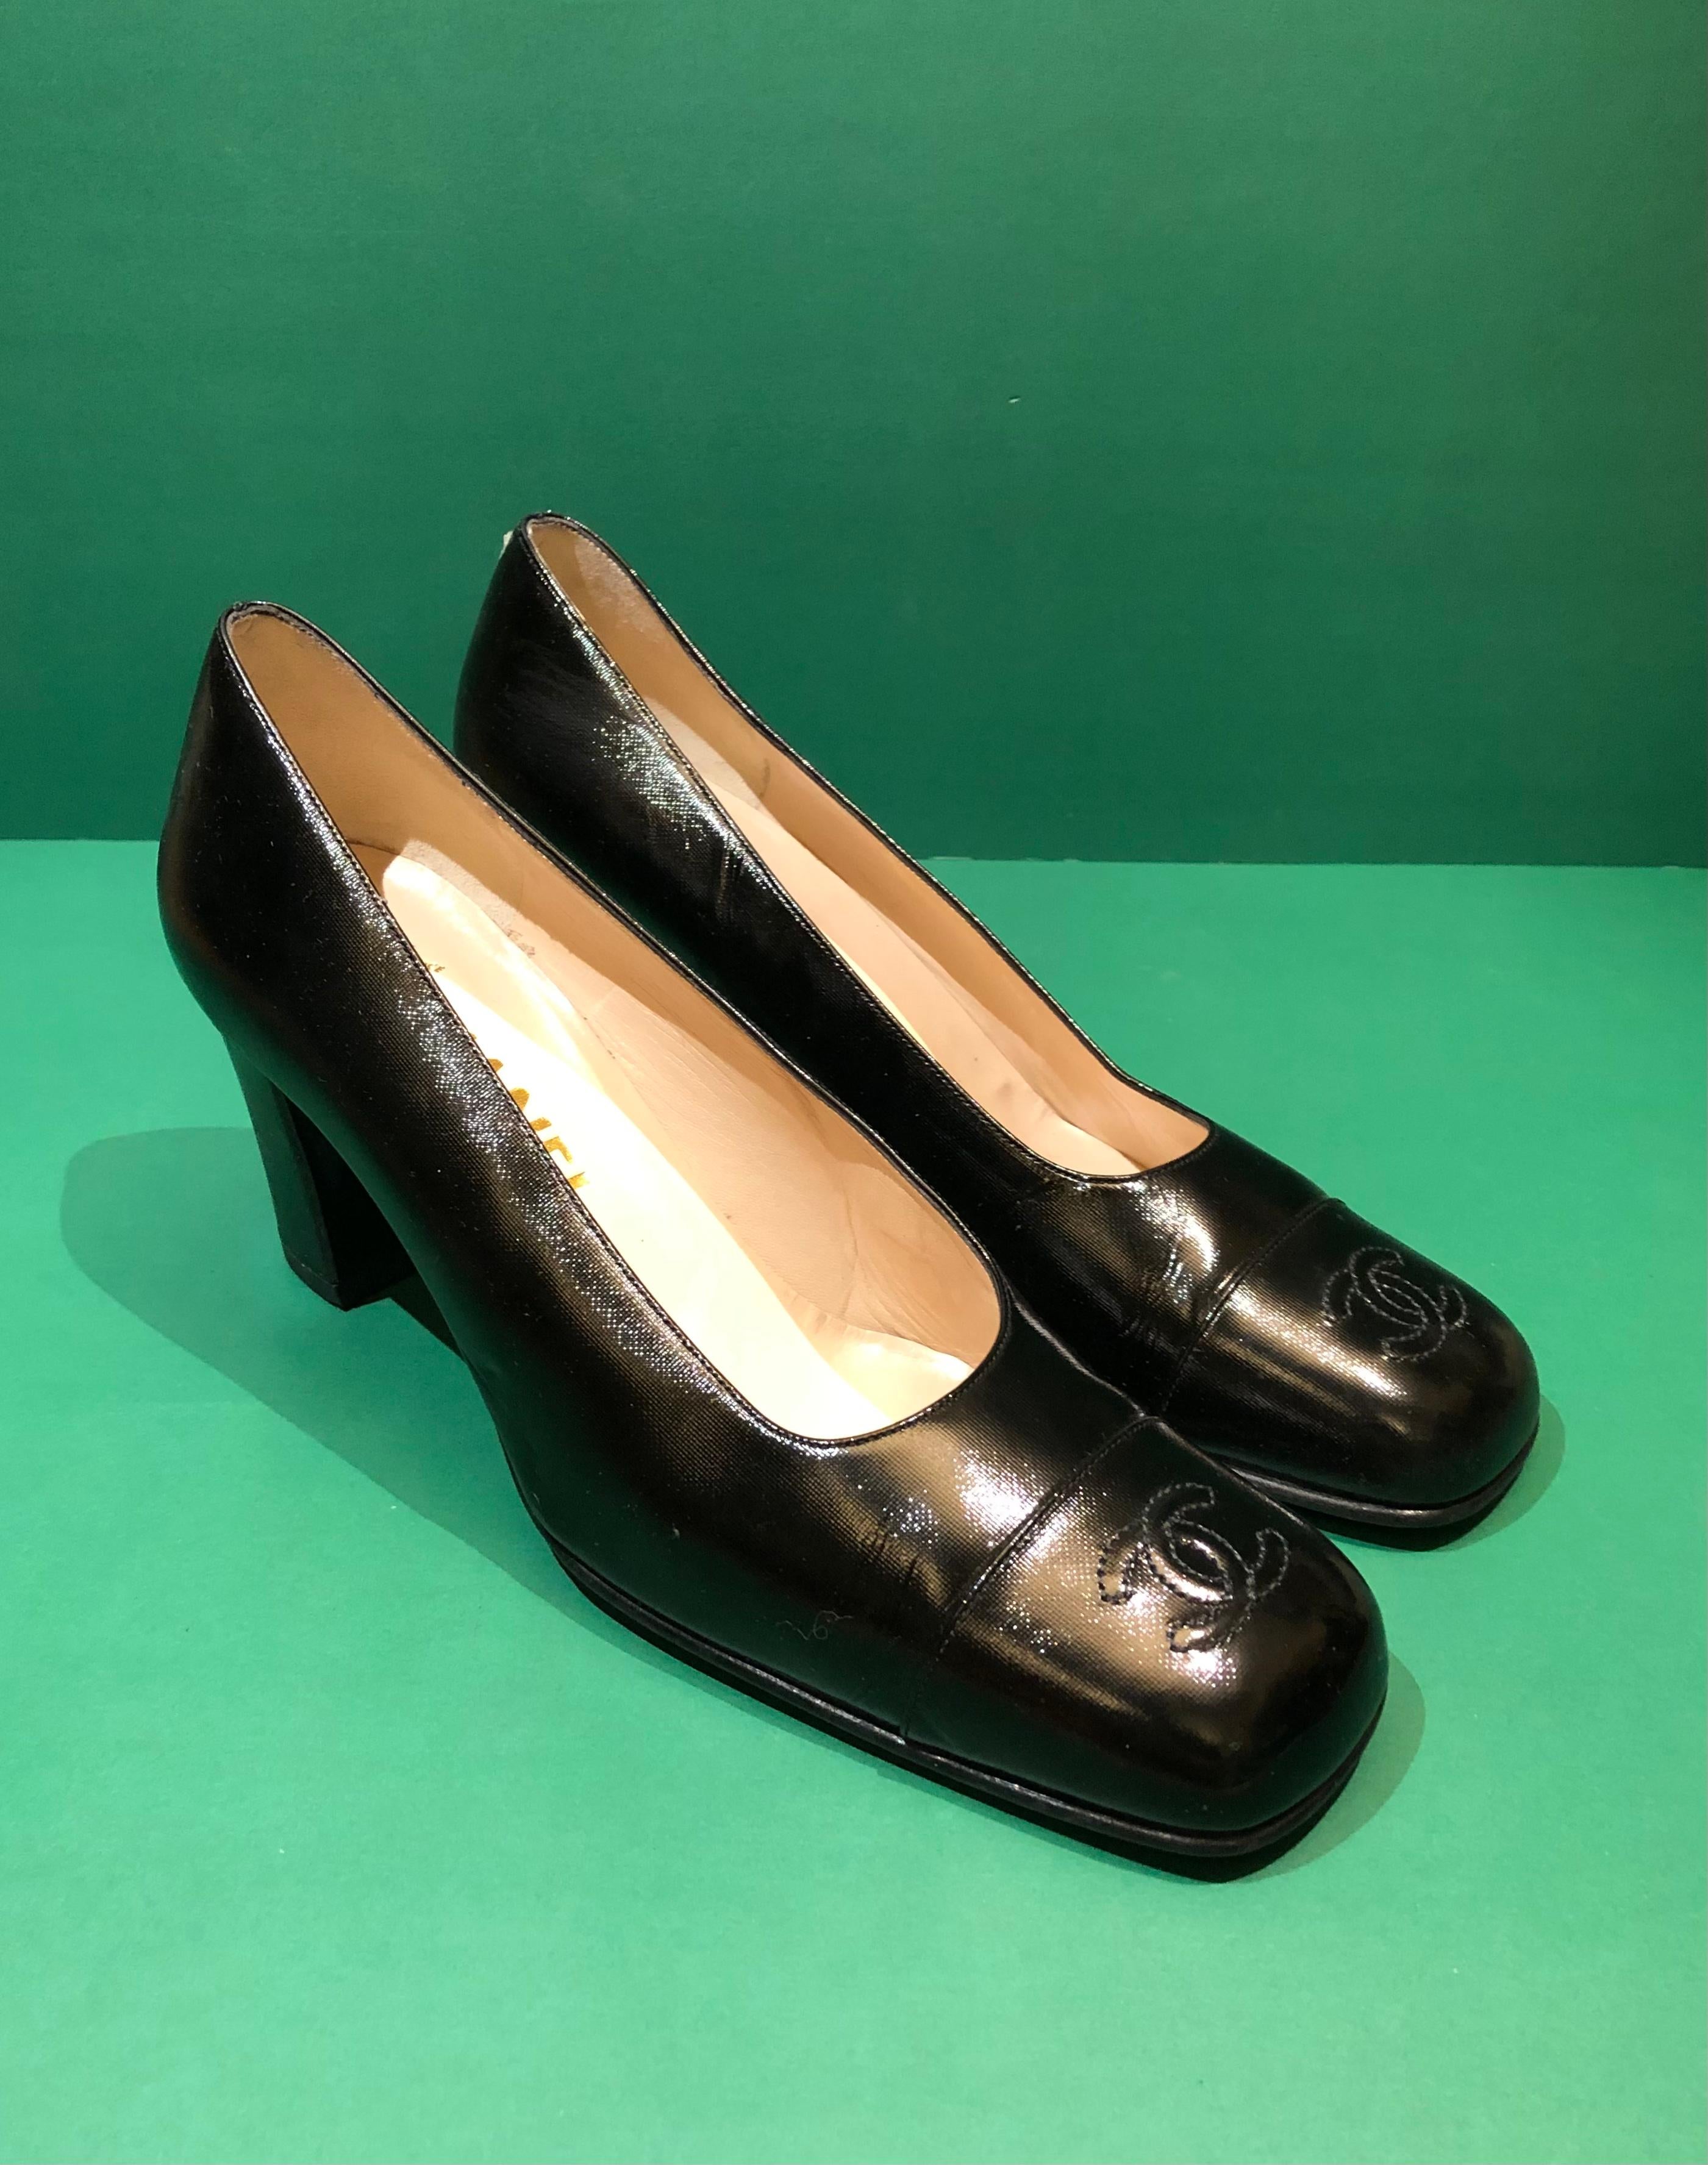 - Vintage 90s Chanel patent leather square toe Mary Jane pumps. 

- Size 38.5. 

